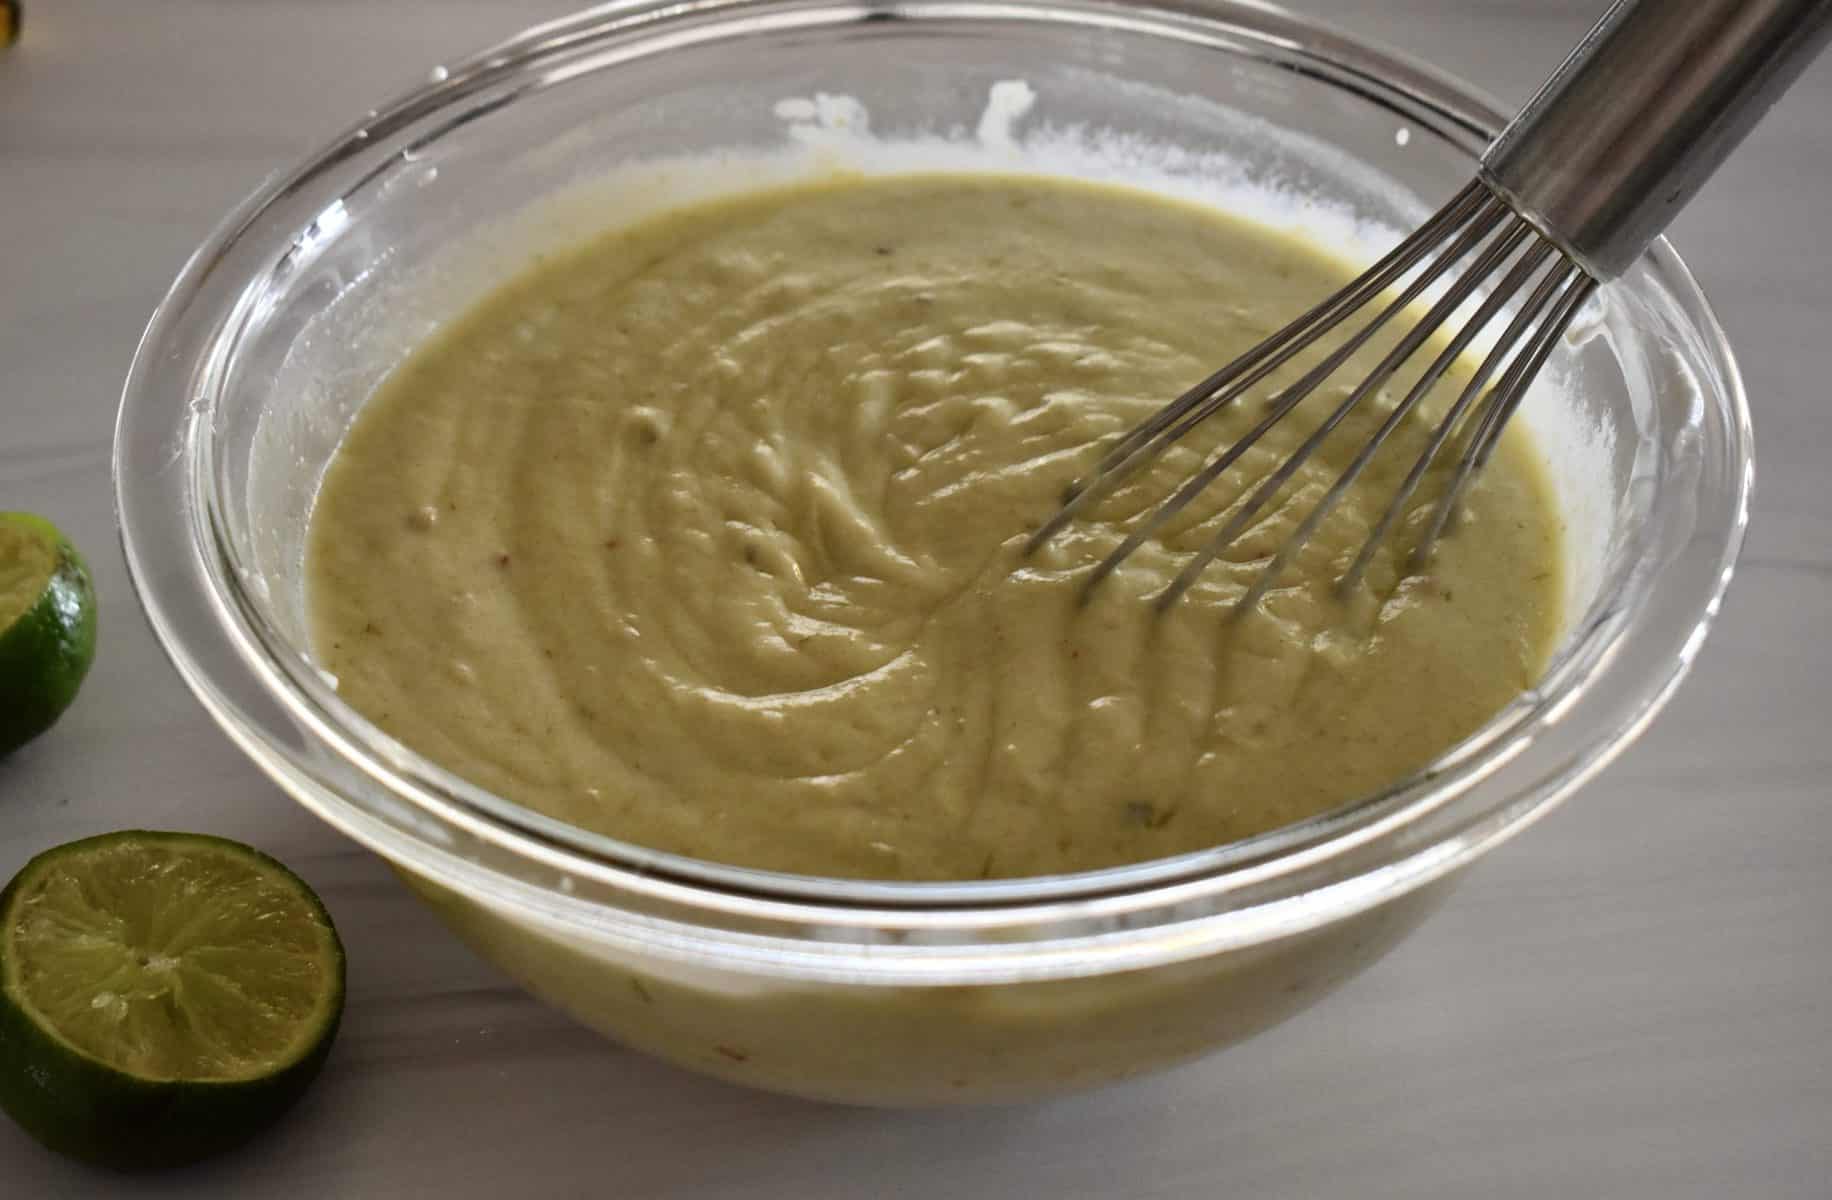 Green Chili Enchilada sauce whisked with greek yogurt and lime.